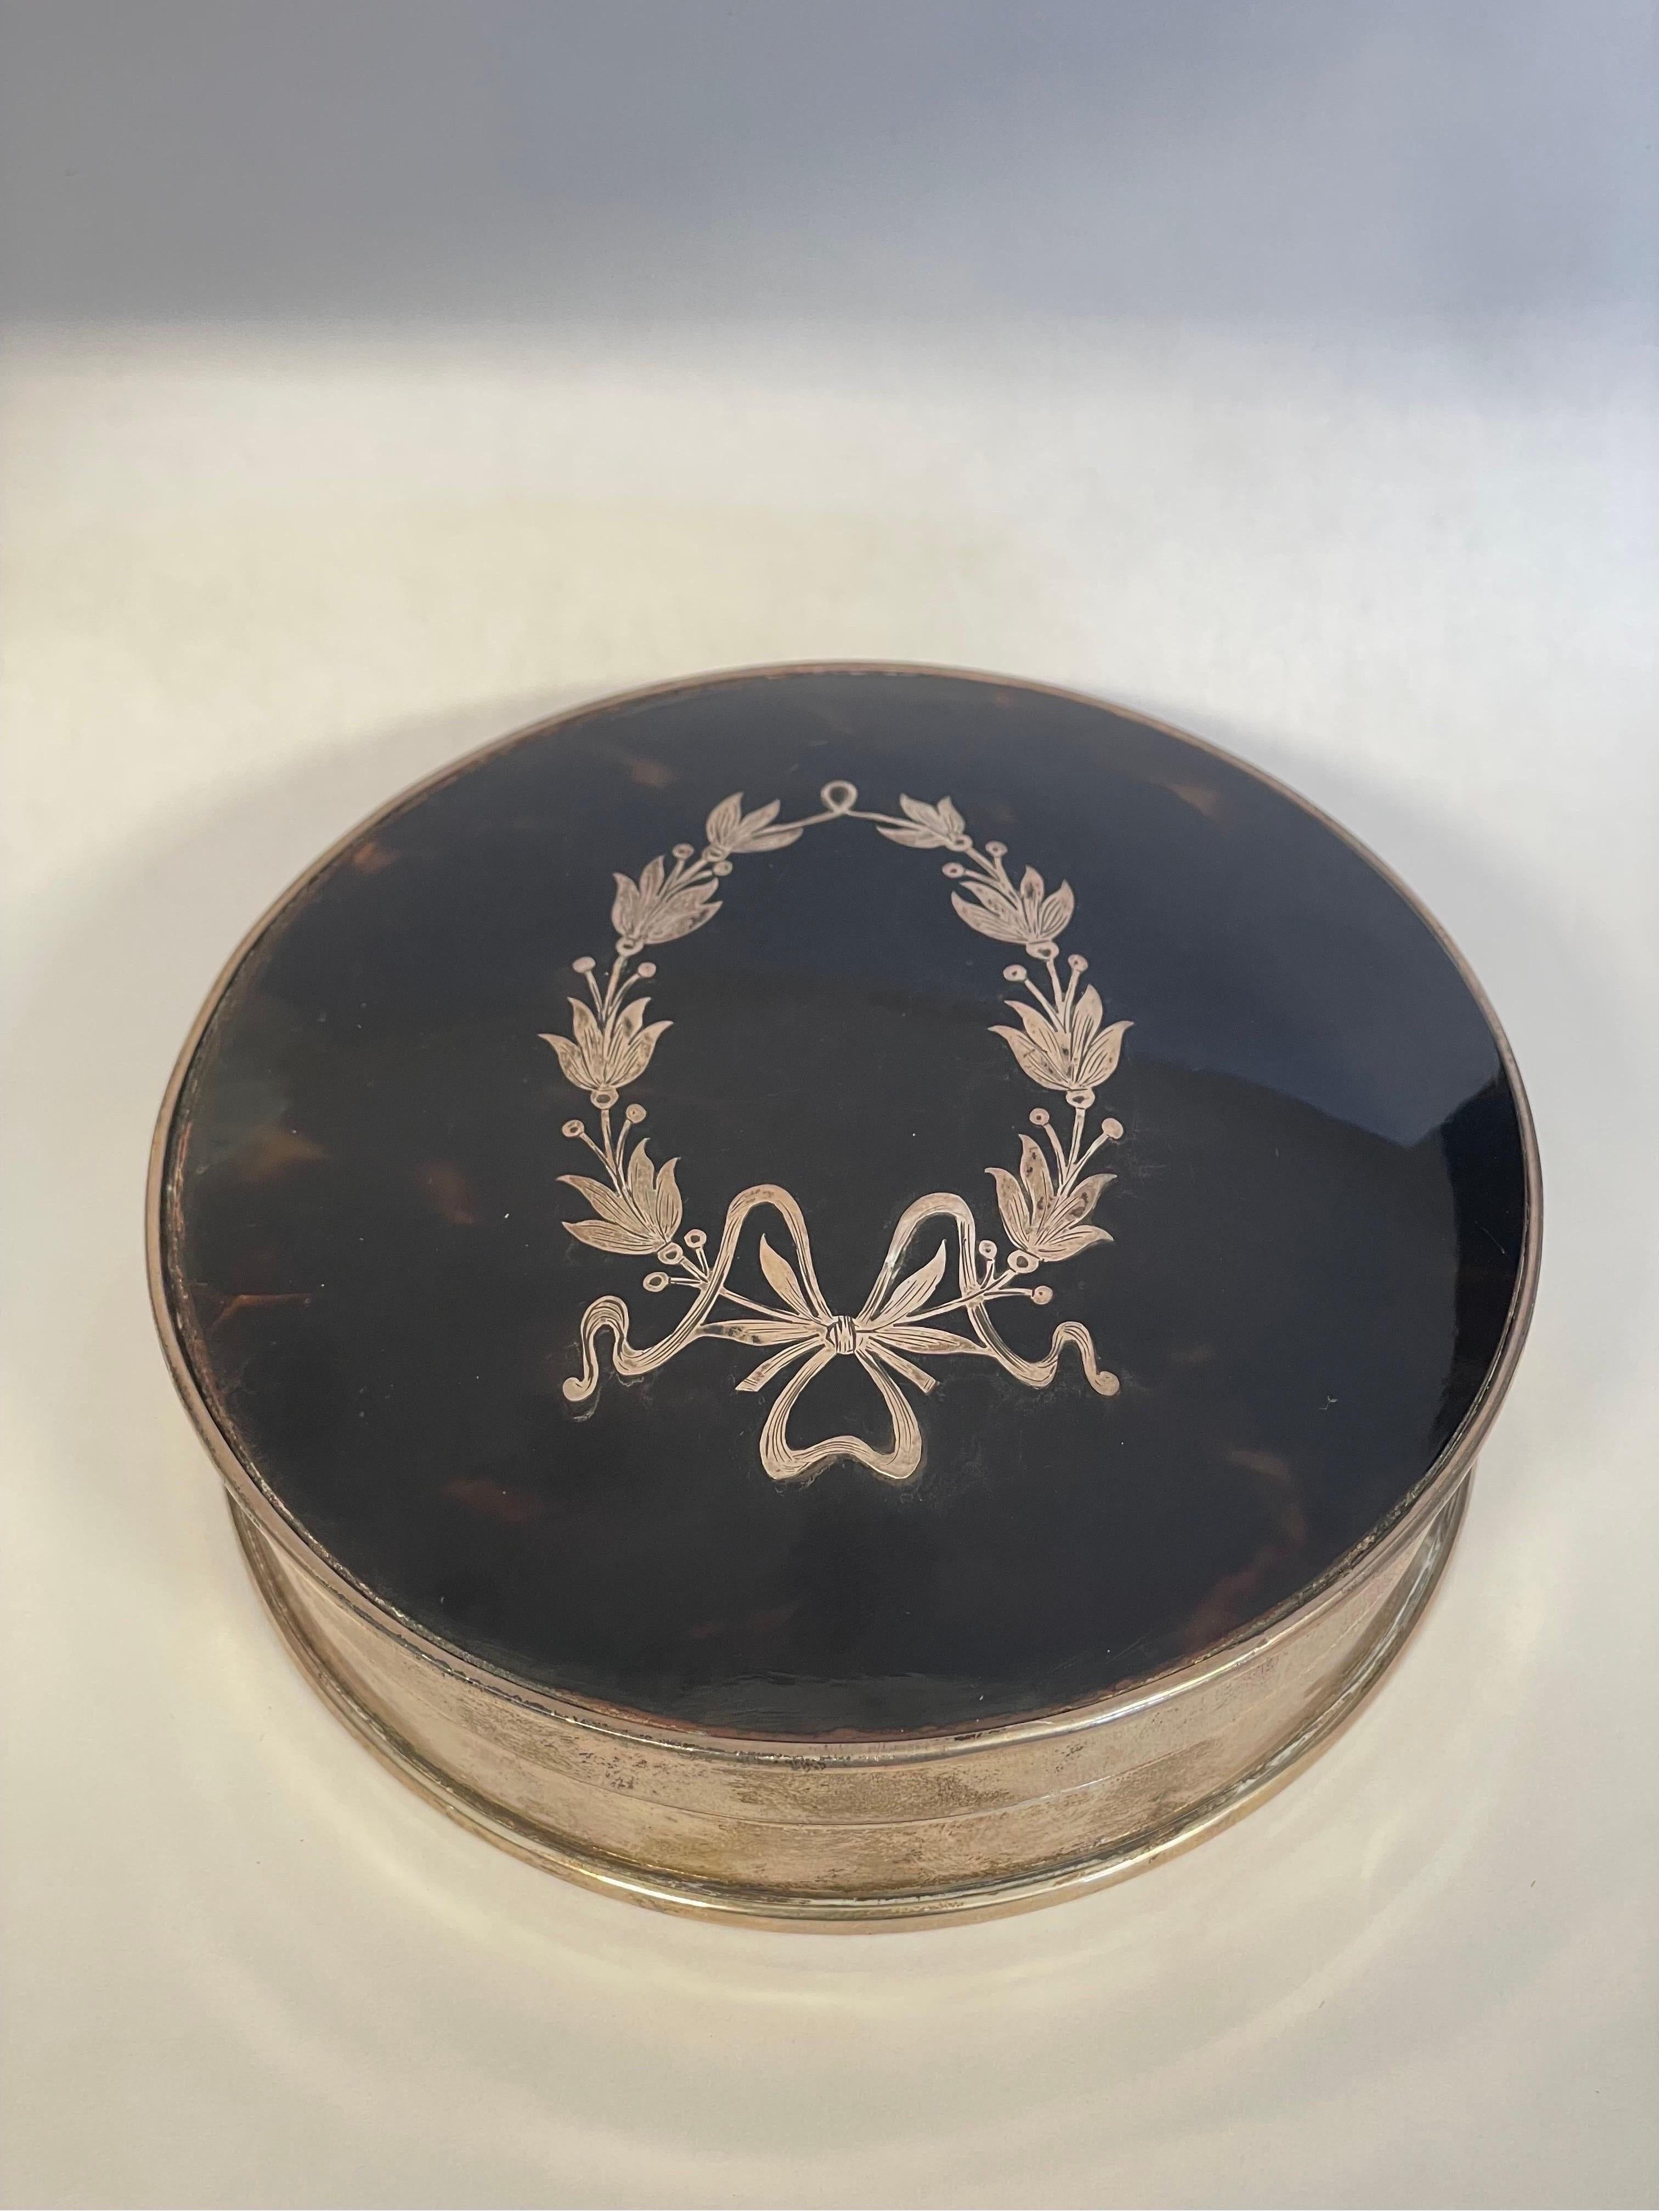 An 1894 antique Edward Souter Barnsley & Co. sterling silver and tortoiseshell powder box decorated with a silver laurel leaf and bow inset to the top. Marked appropriately to the side.